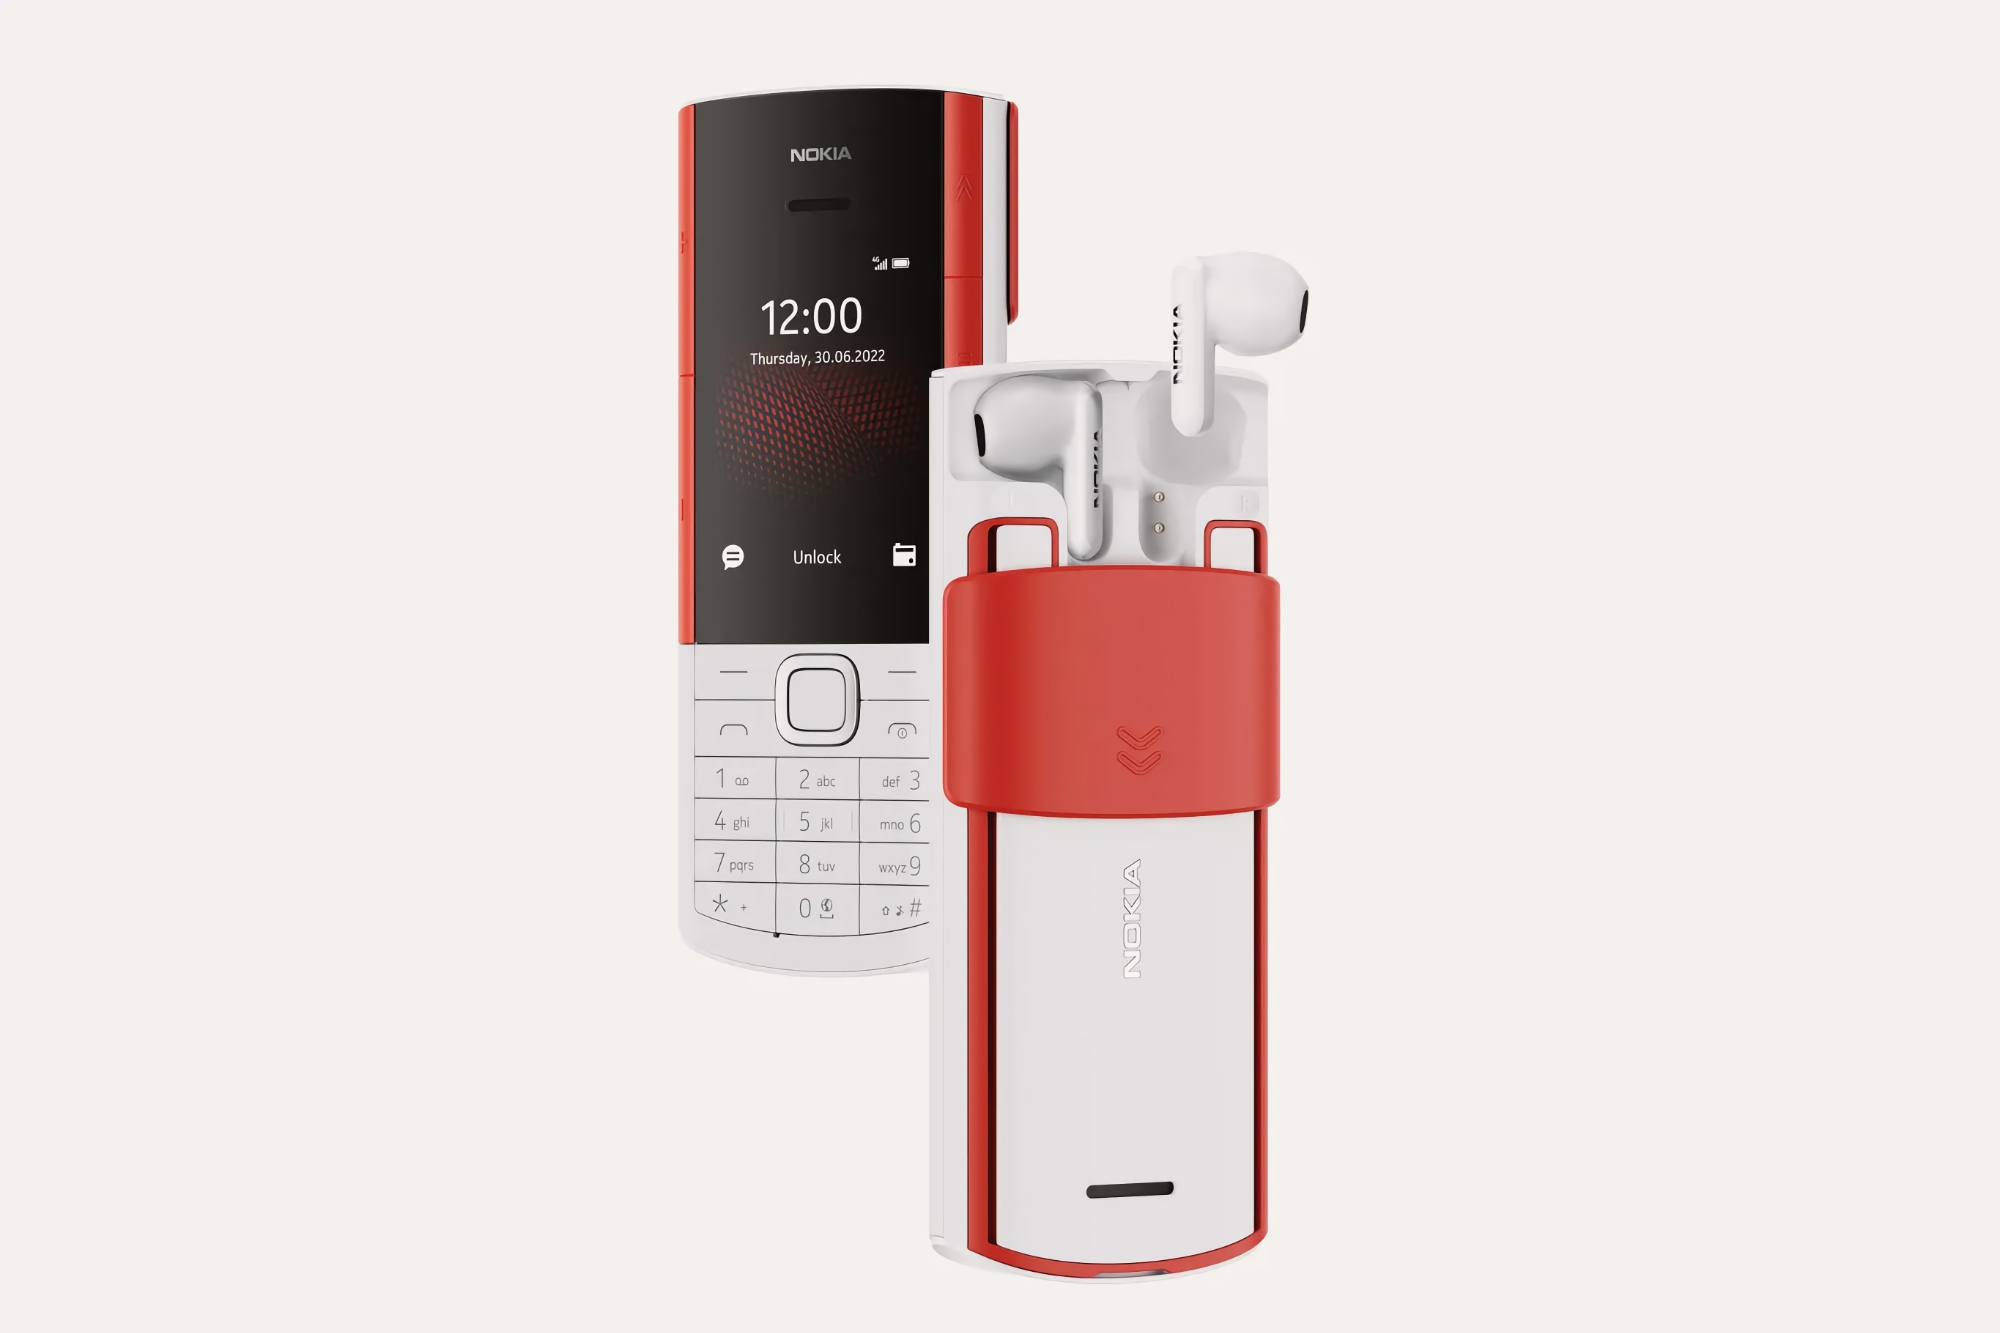 HMD Global introduced the Nokia 5710 XpressAudio: a phone with built-in TWS headphones for 69 euros